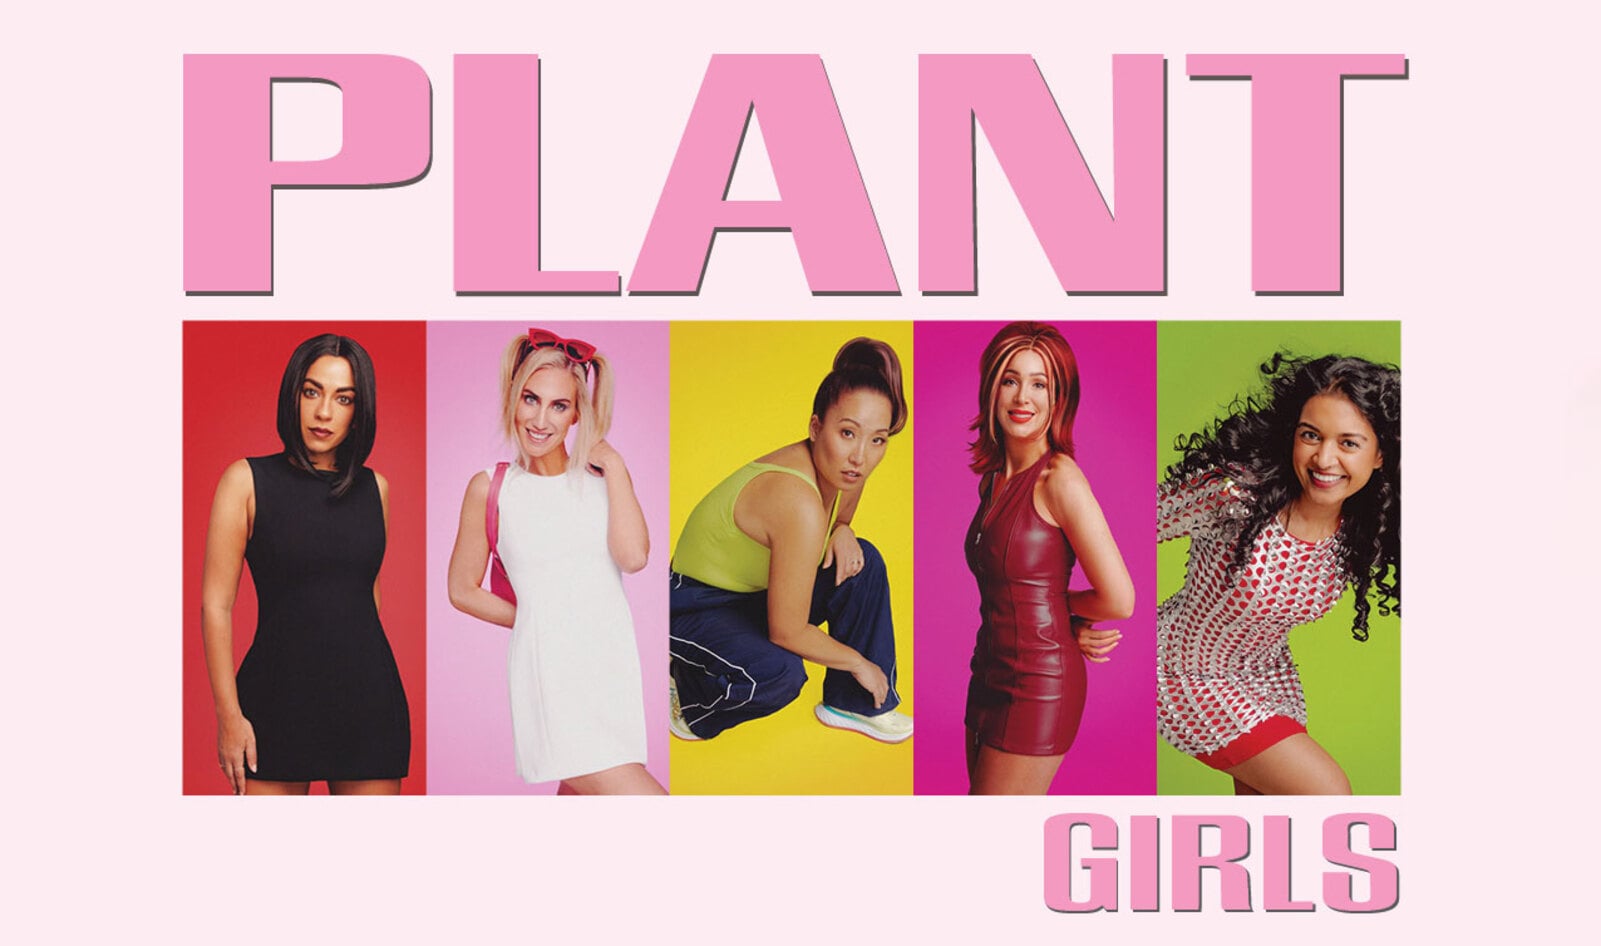 "Wannabe" a Spice Girl? The ‘90s Girl Power Icons Just Got a Vegan Makeover&nbsp;&nbsp;